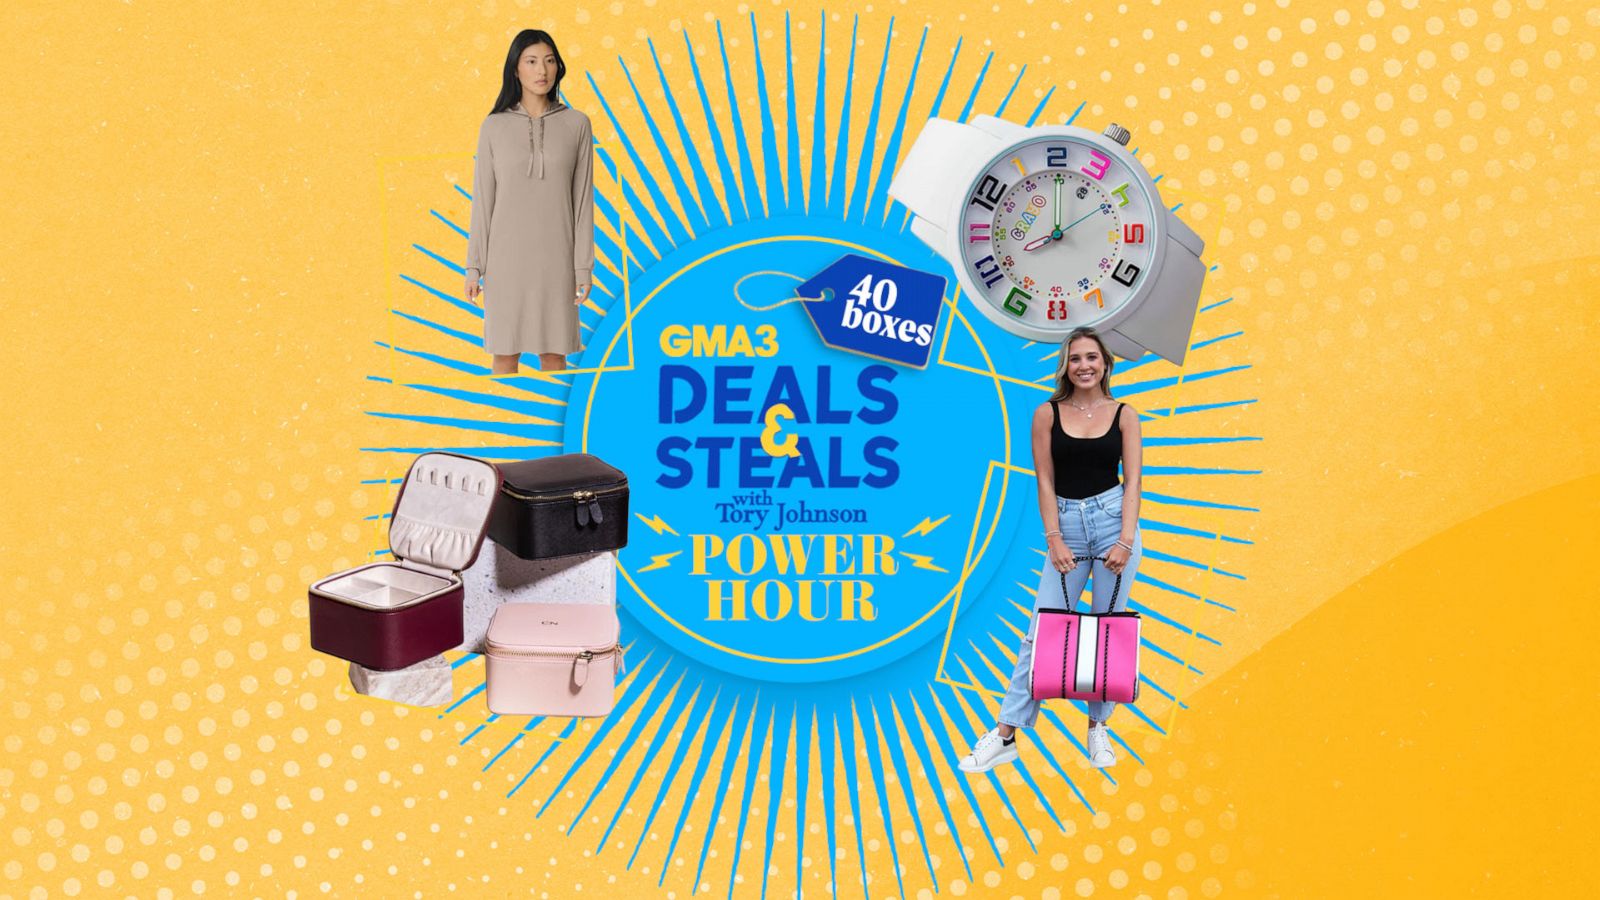 GMA3' Deals & Steals x 40 Boxes Memorial Day savings on clothing